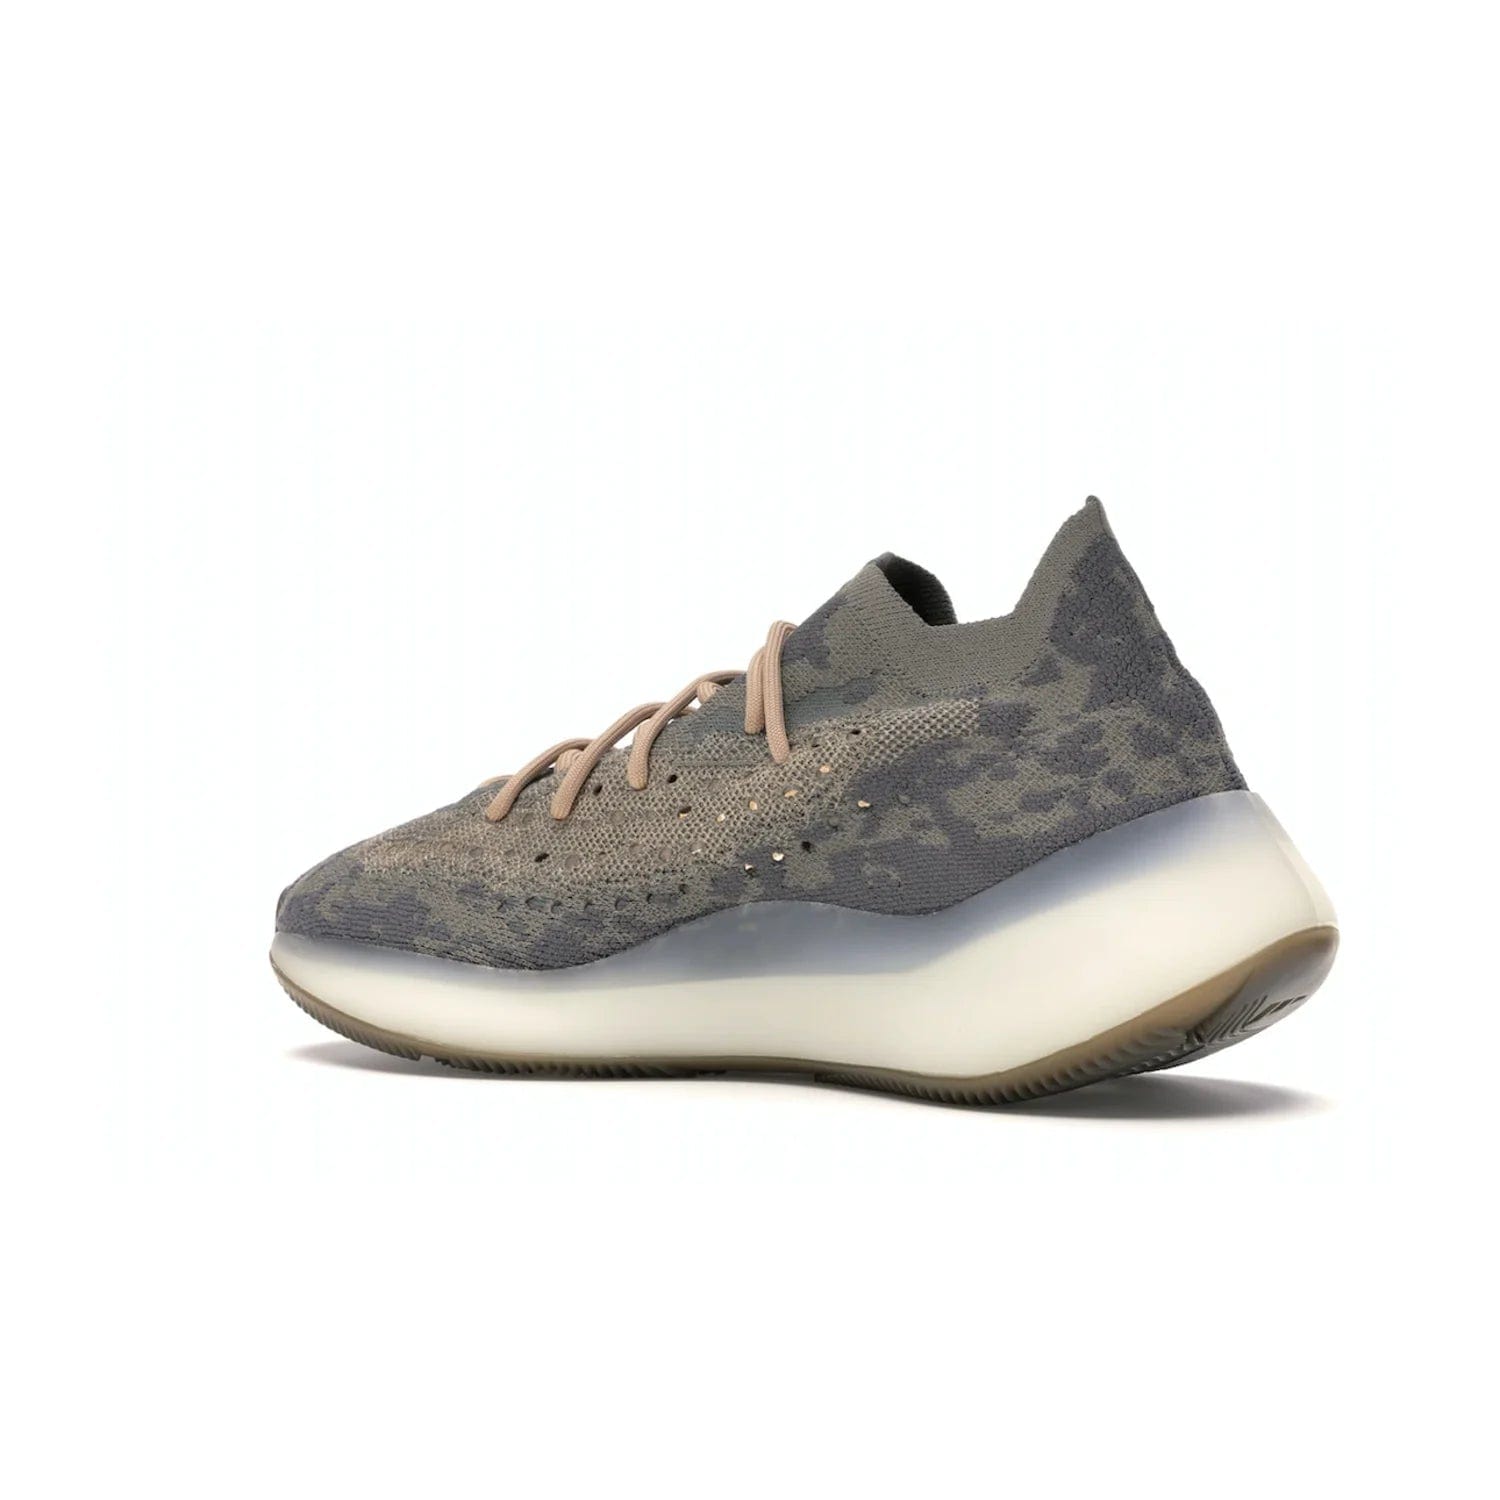 adidas Yeezy Boost 380 Mist Reflective - Image 22 - Only at www.BallersClubKickz.com - Shop adidas Yeezy Boost 380 Mist Reflective for comfort and style. Enjoy unique reflective upper, upgraded translucent Boost midsole, and engineered gum outsole grip. The Mist/Mist/Mist colorway released in February of 2020 is perfect for everyday wear.